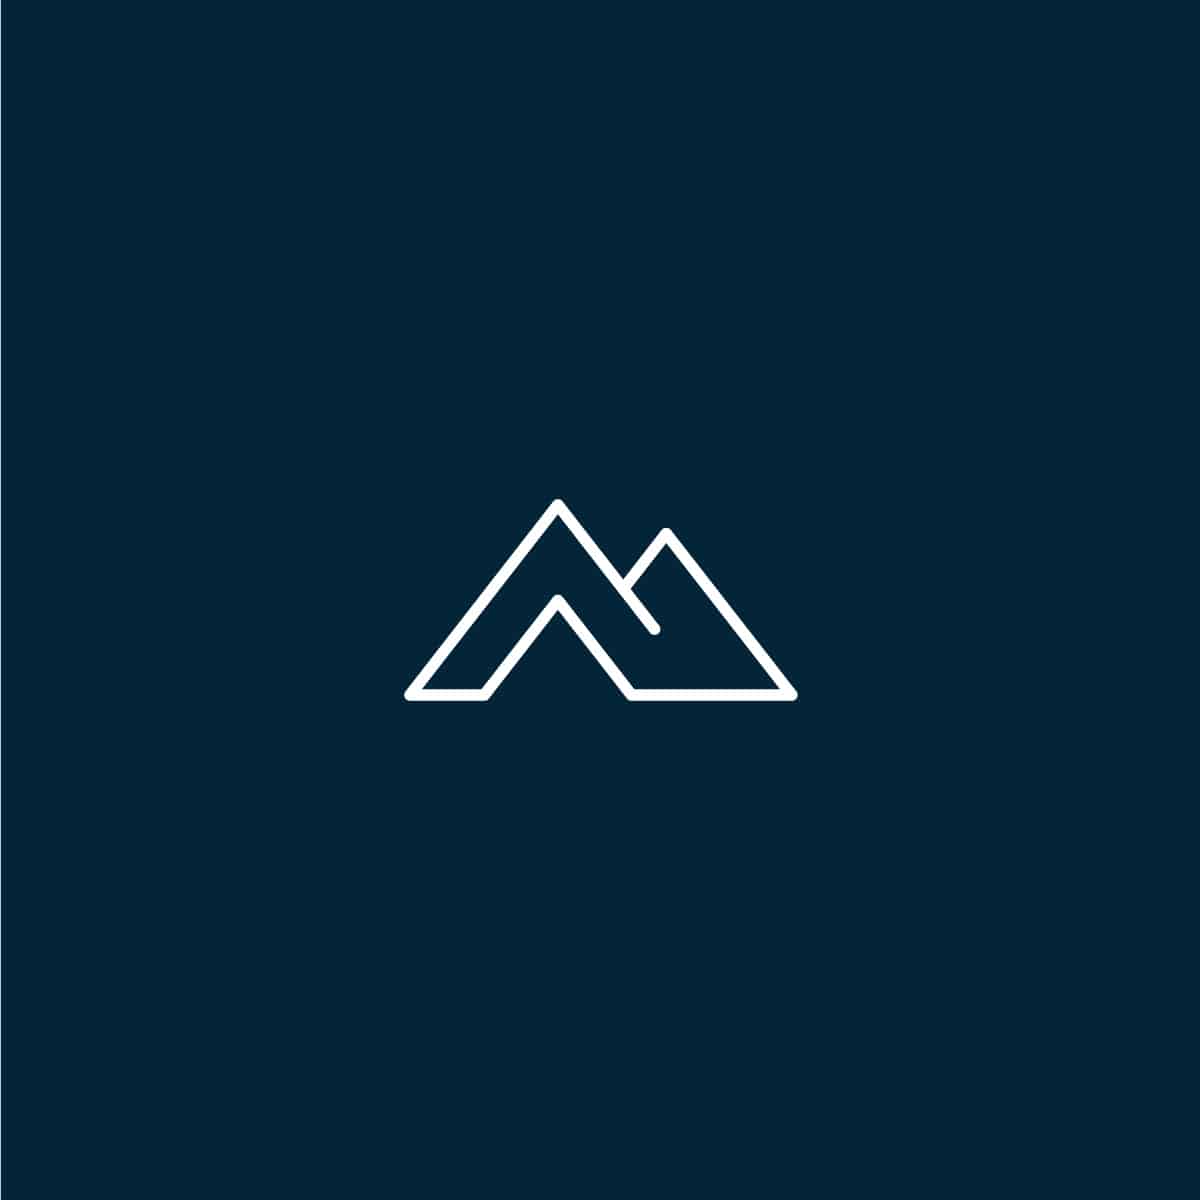 The Founders Attorney Logo Make of Mountains by Stellen Design Branding Agency in Southern California